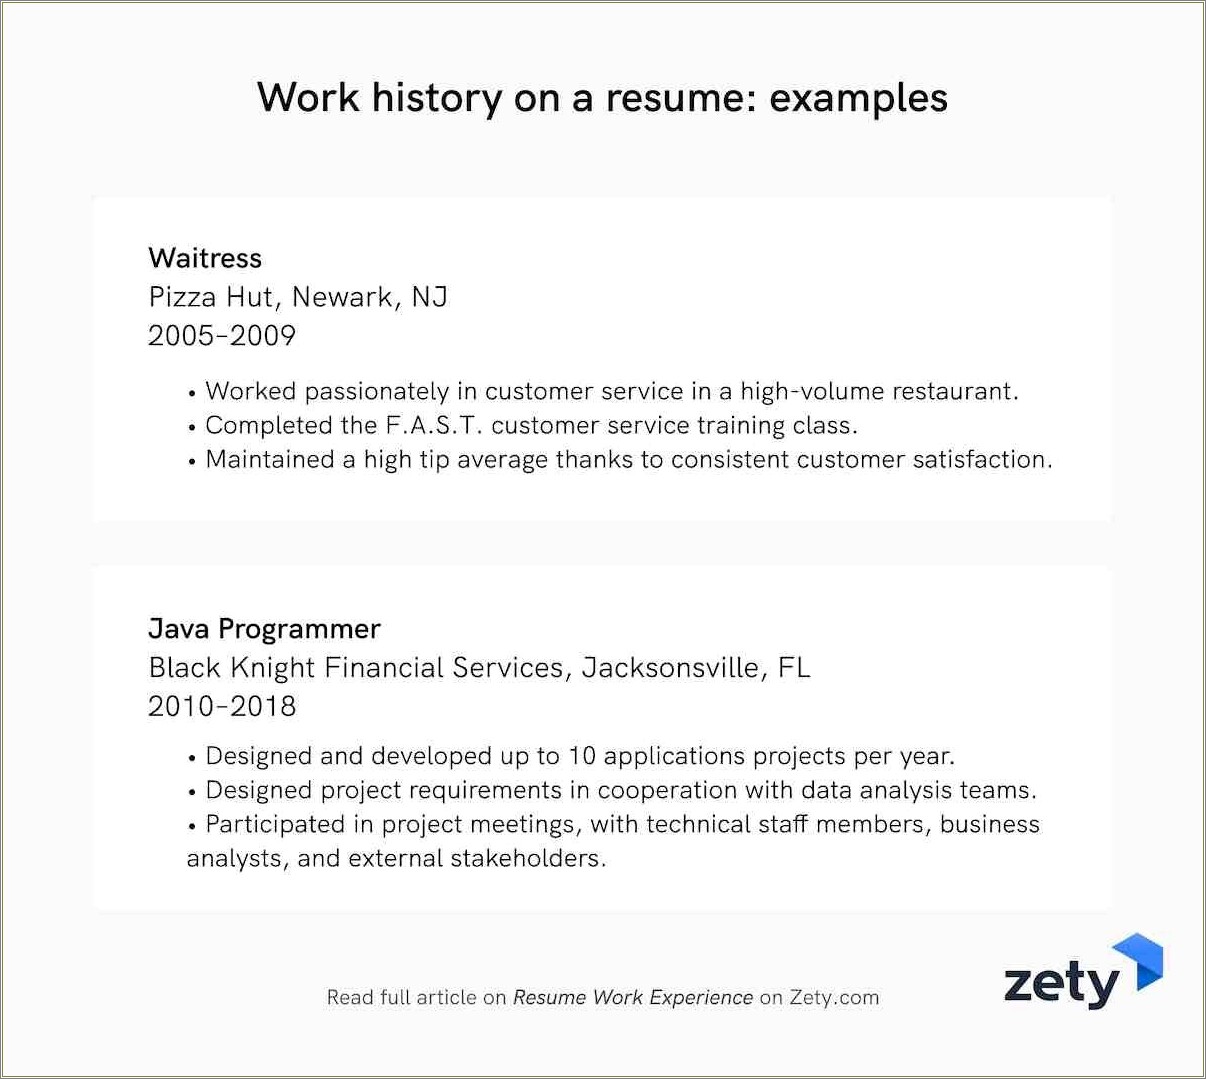 Matching Resumes And Jobs Based On Relevance Models